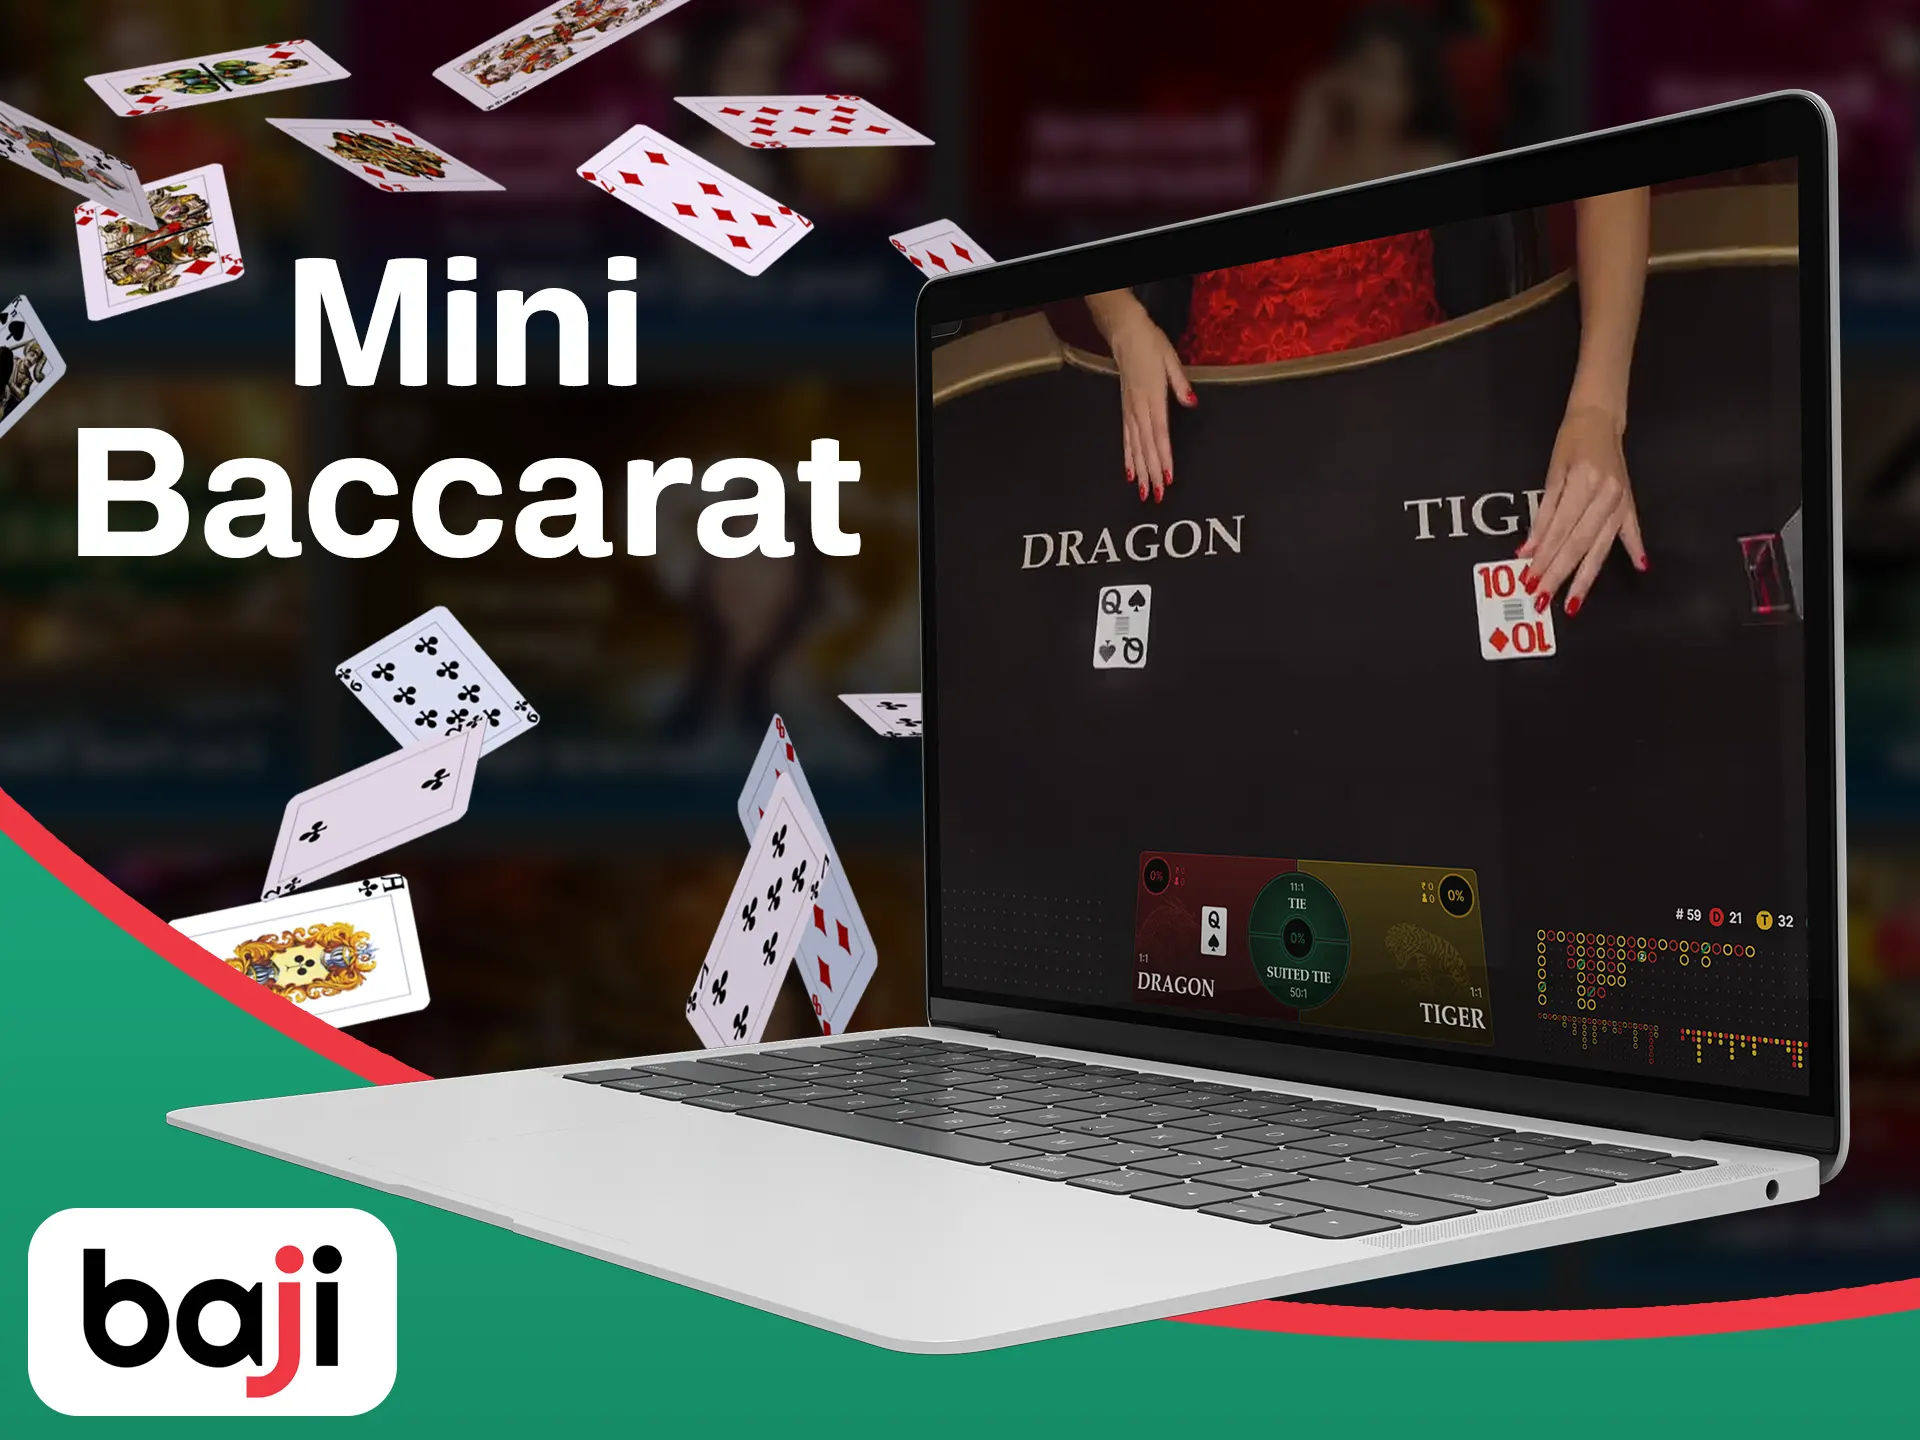 Try the faster and less profitable mini baccarat version.